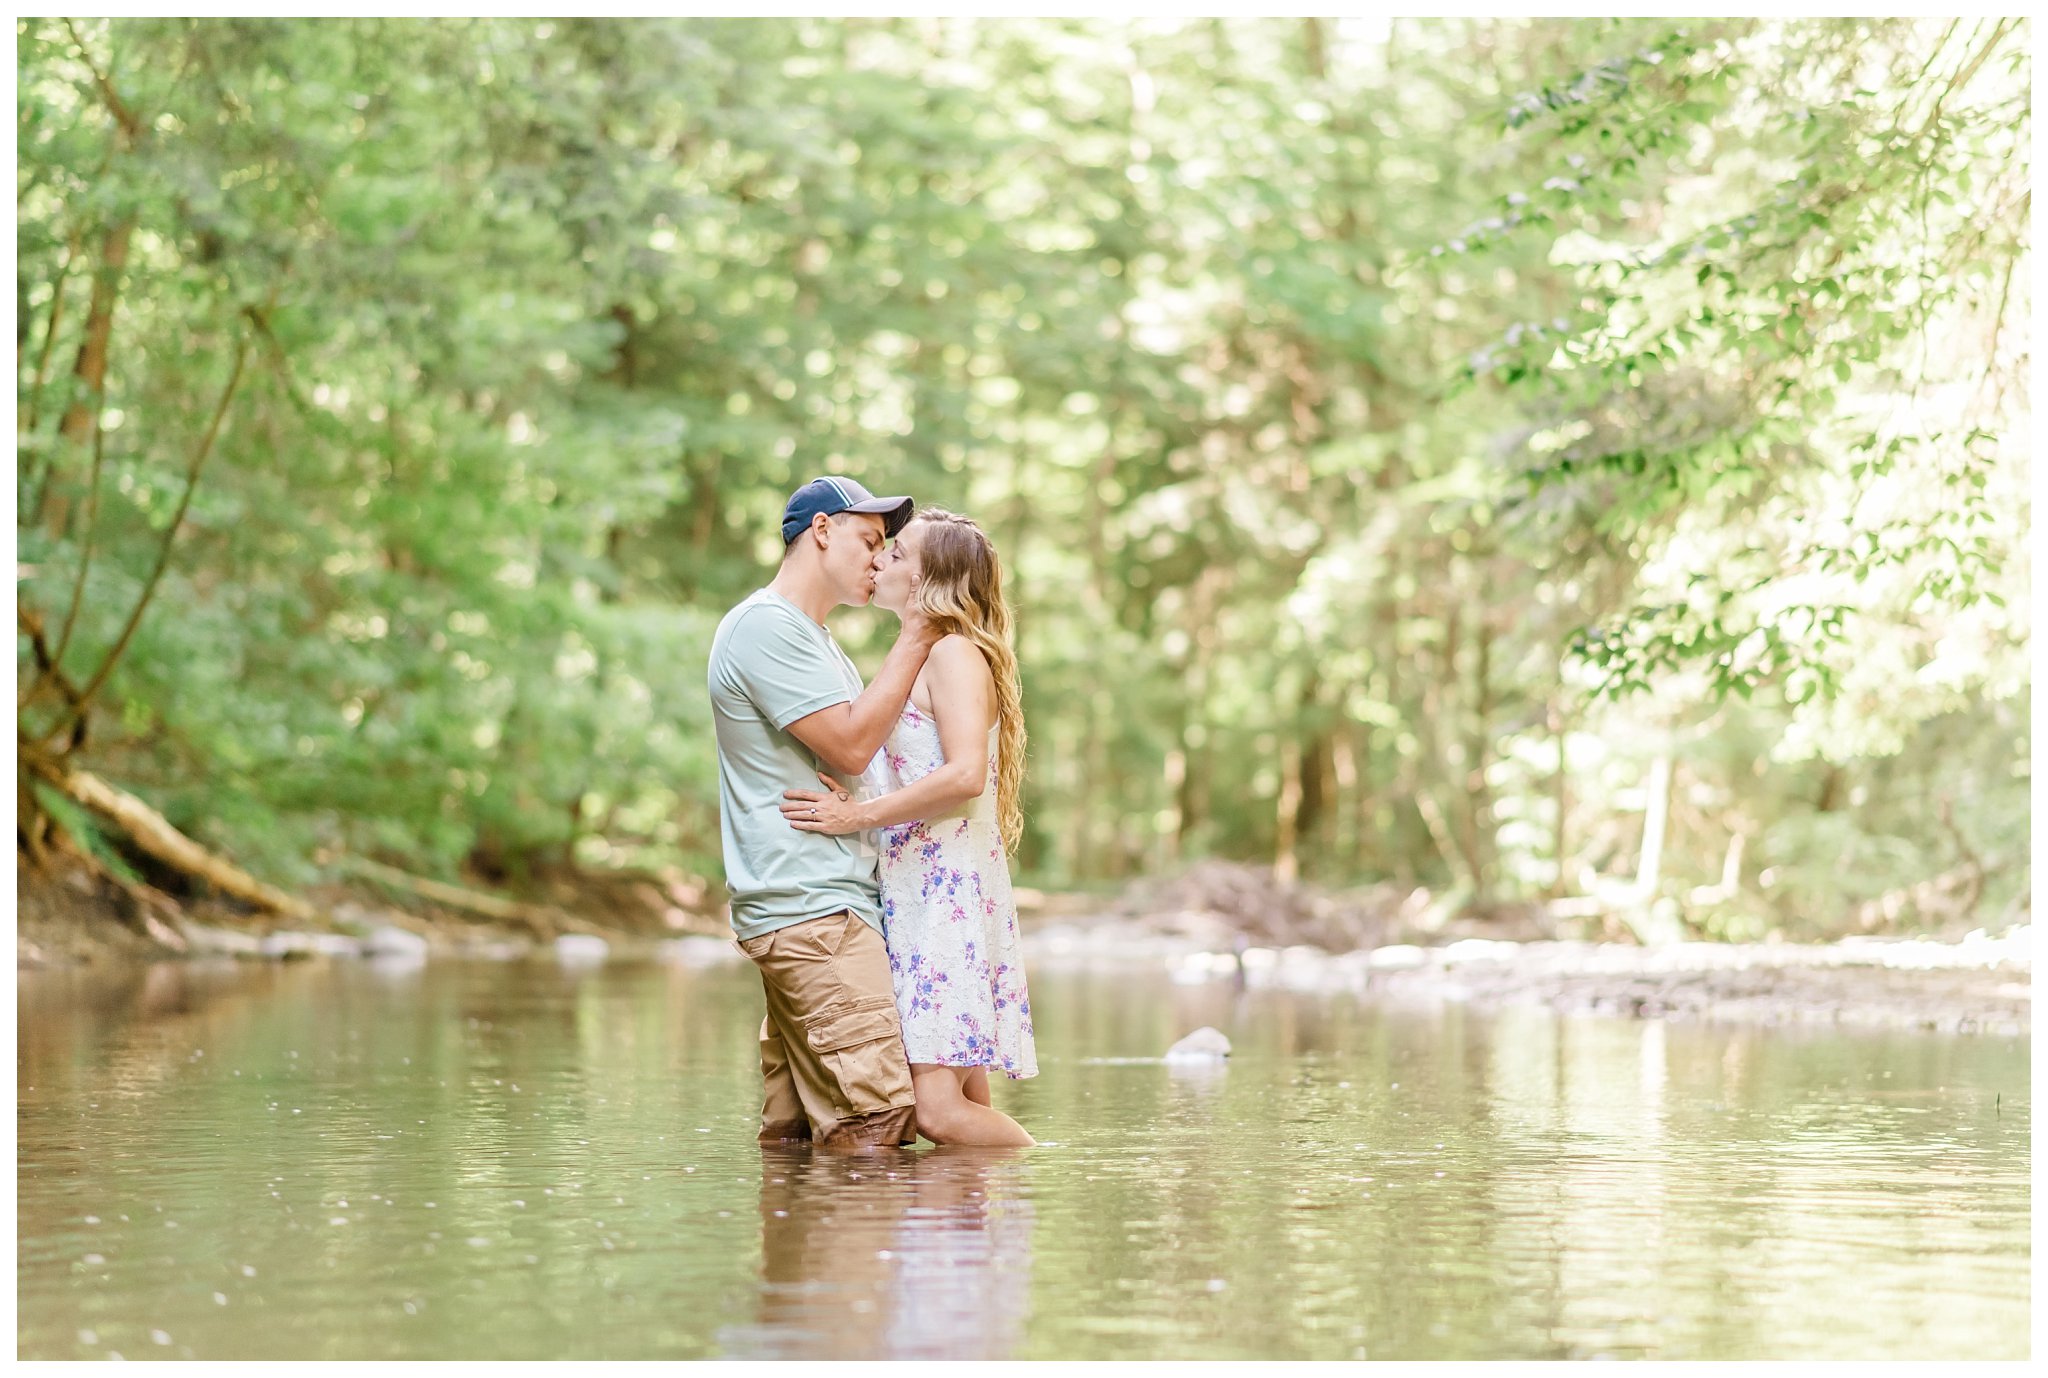 Delphi Falls Engagement Session. Joanna Young Photography